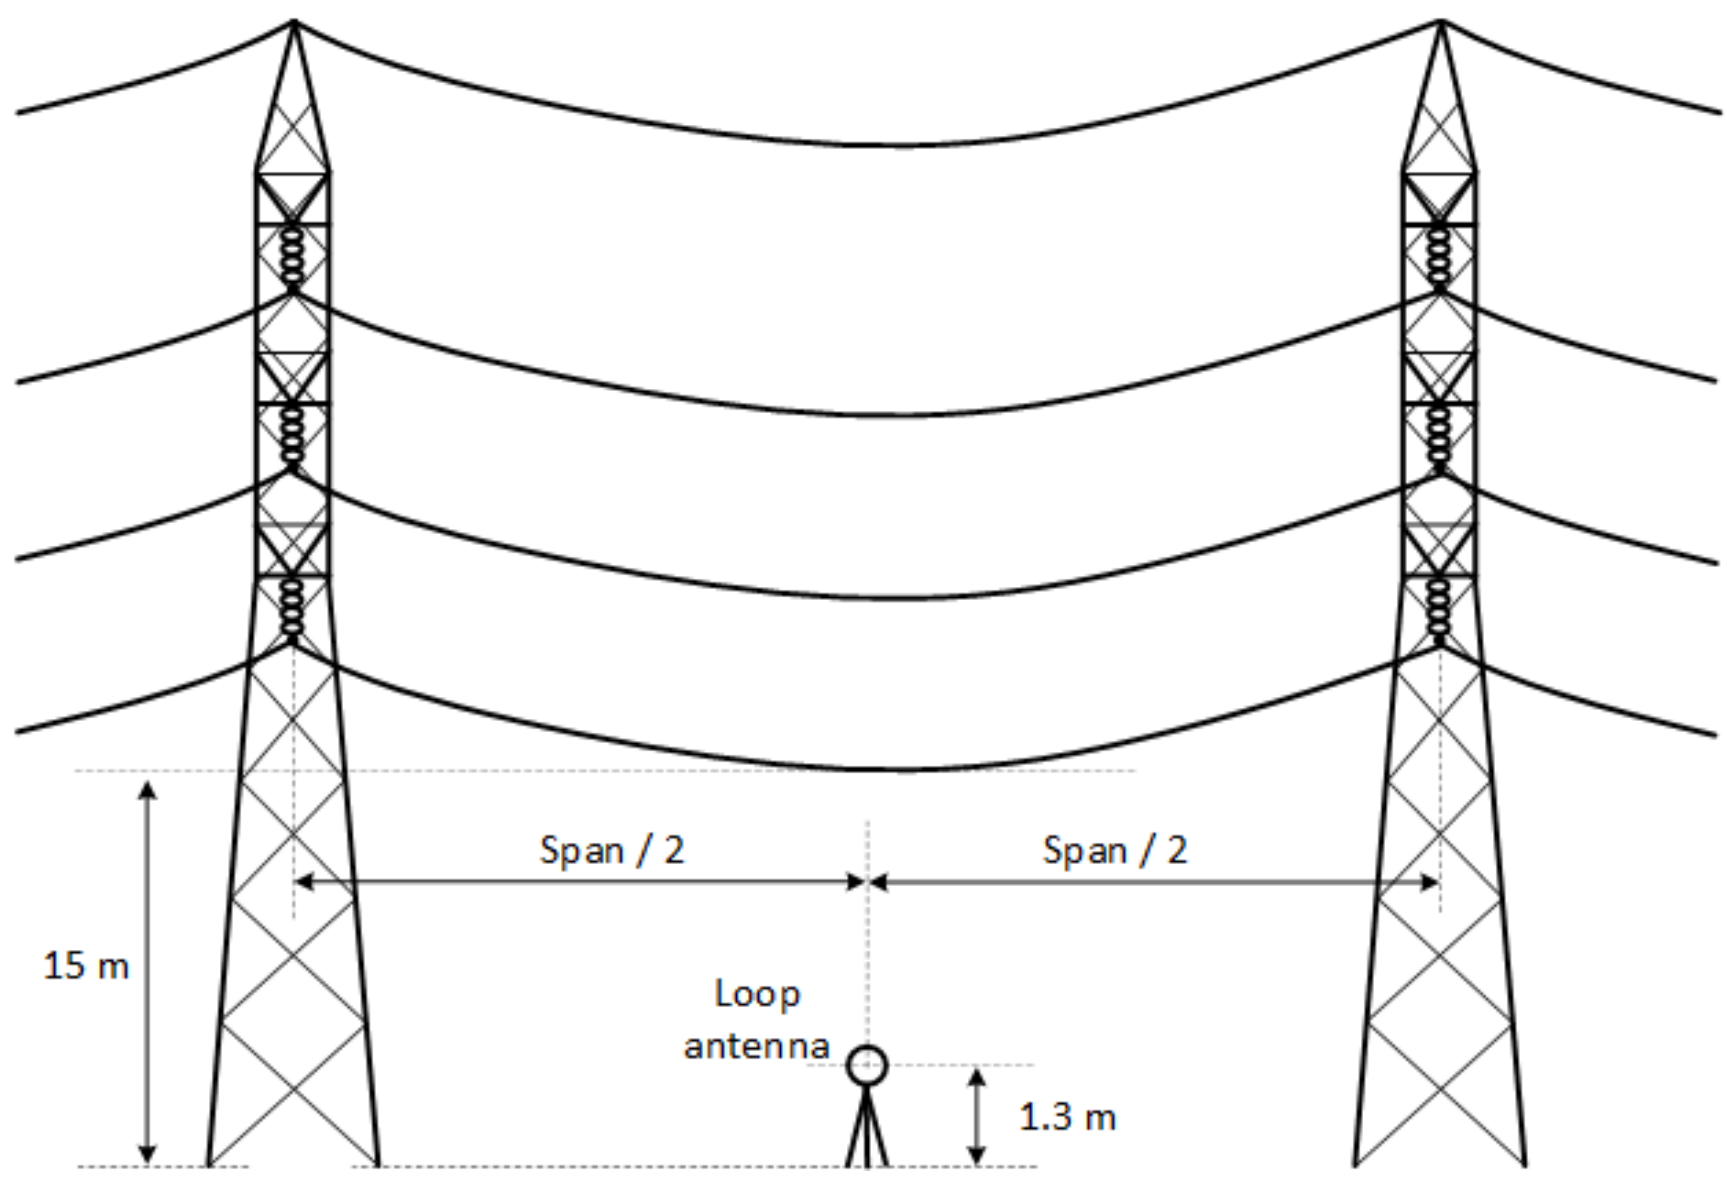 Figure C3: Antenna position (longitudinal view) (the long description is located below the image)